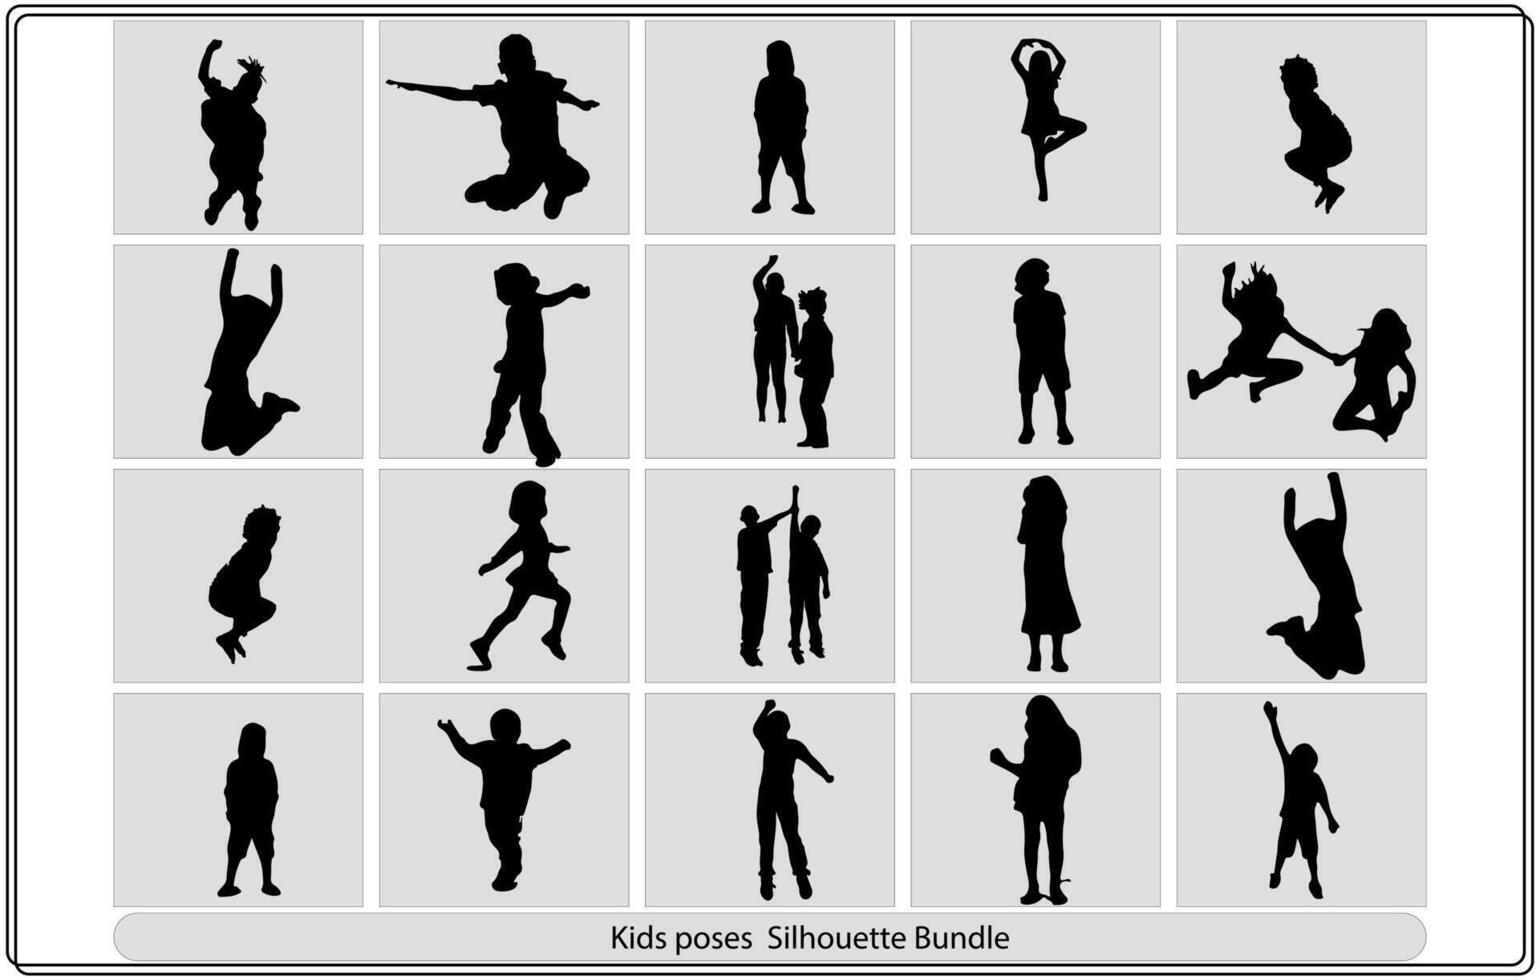 Happy children silhouettes on summer meadow running and jumping silhouette vector